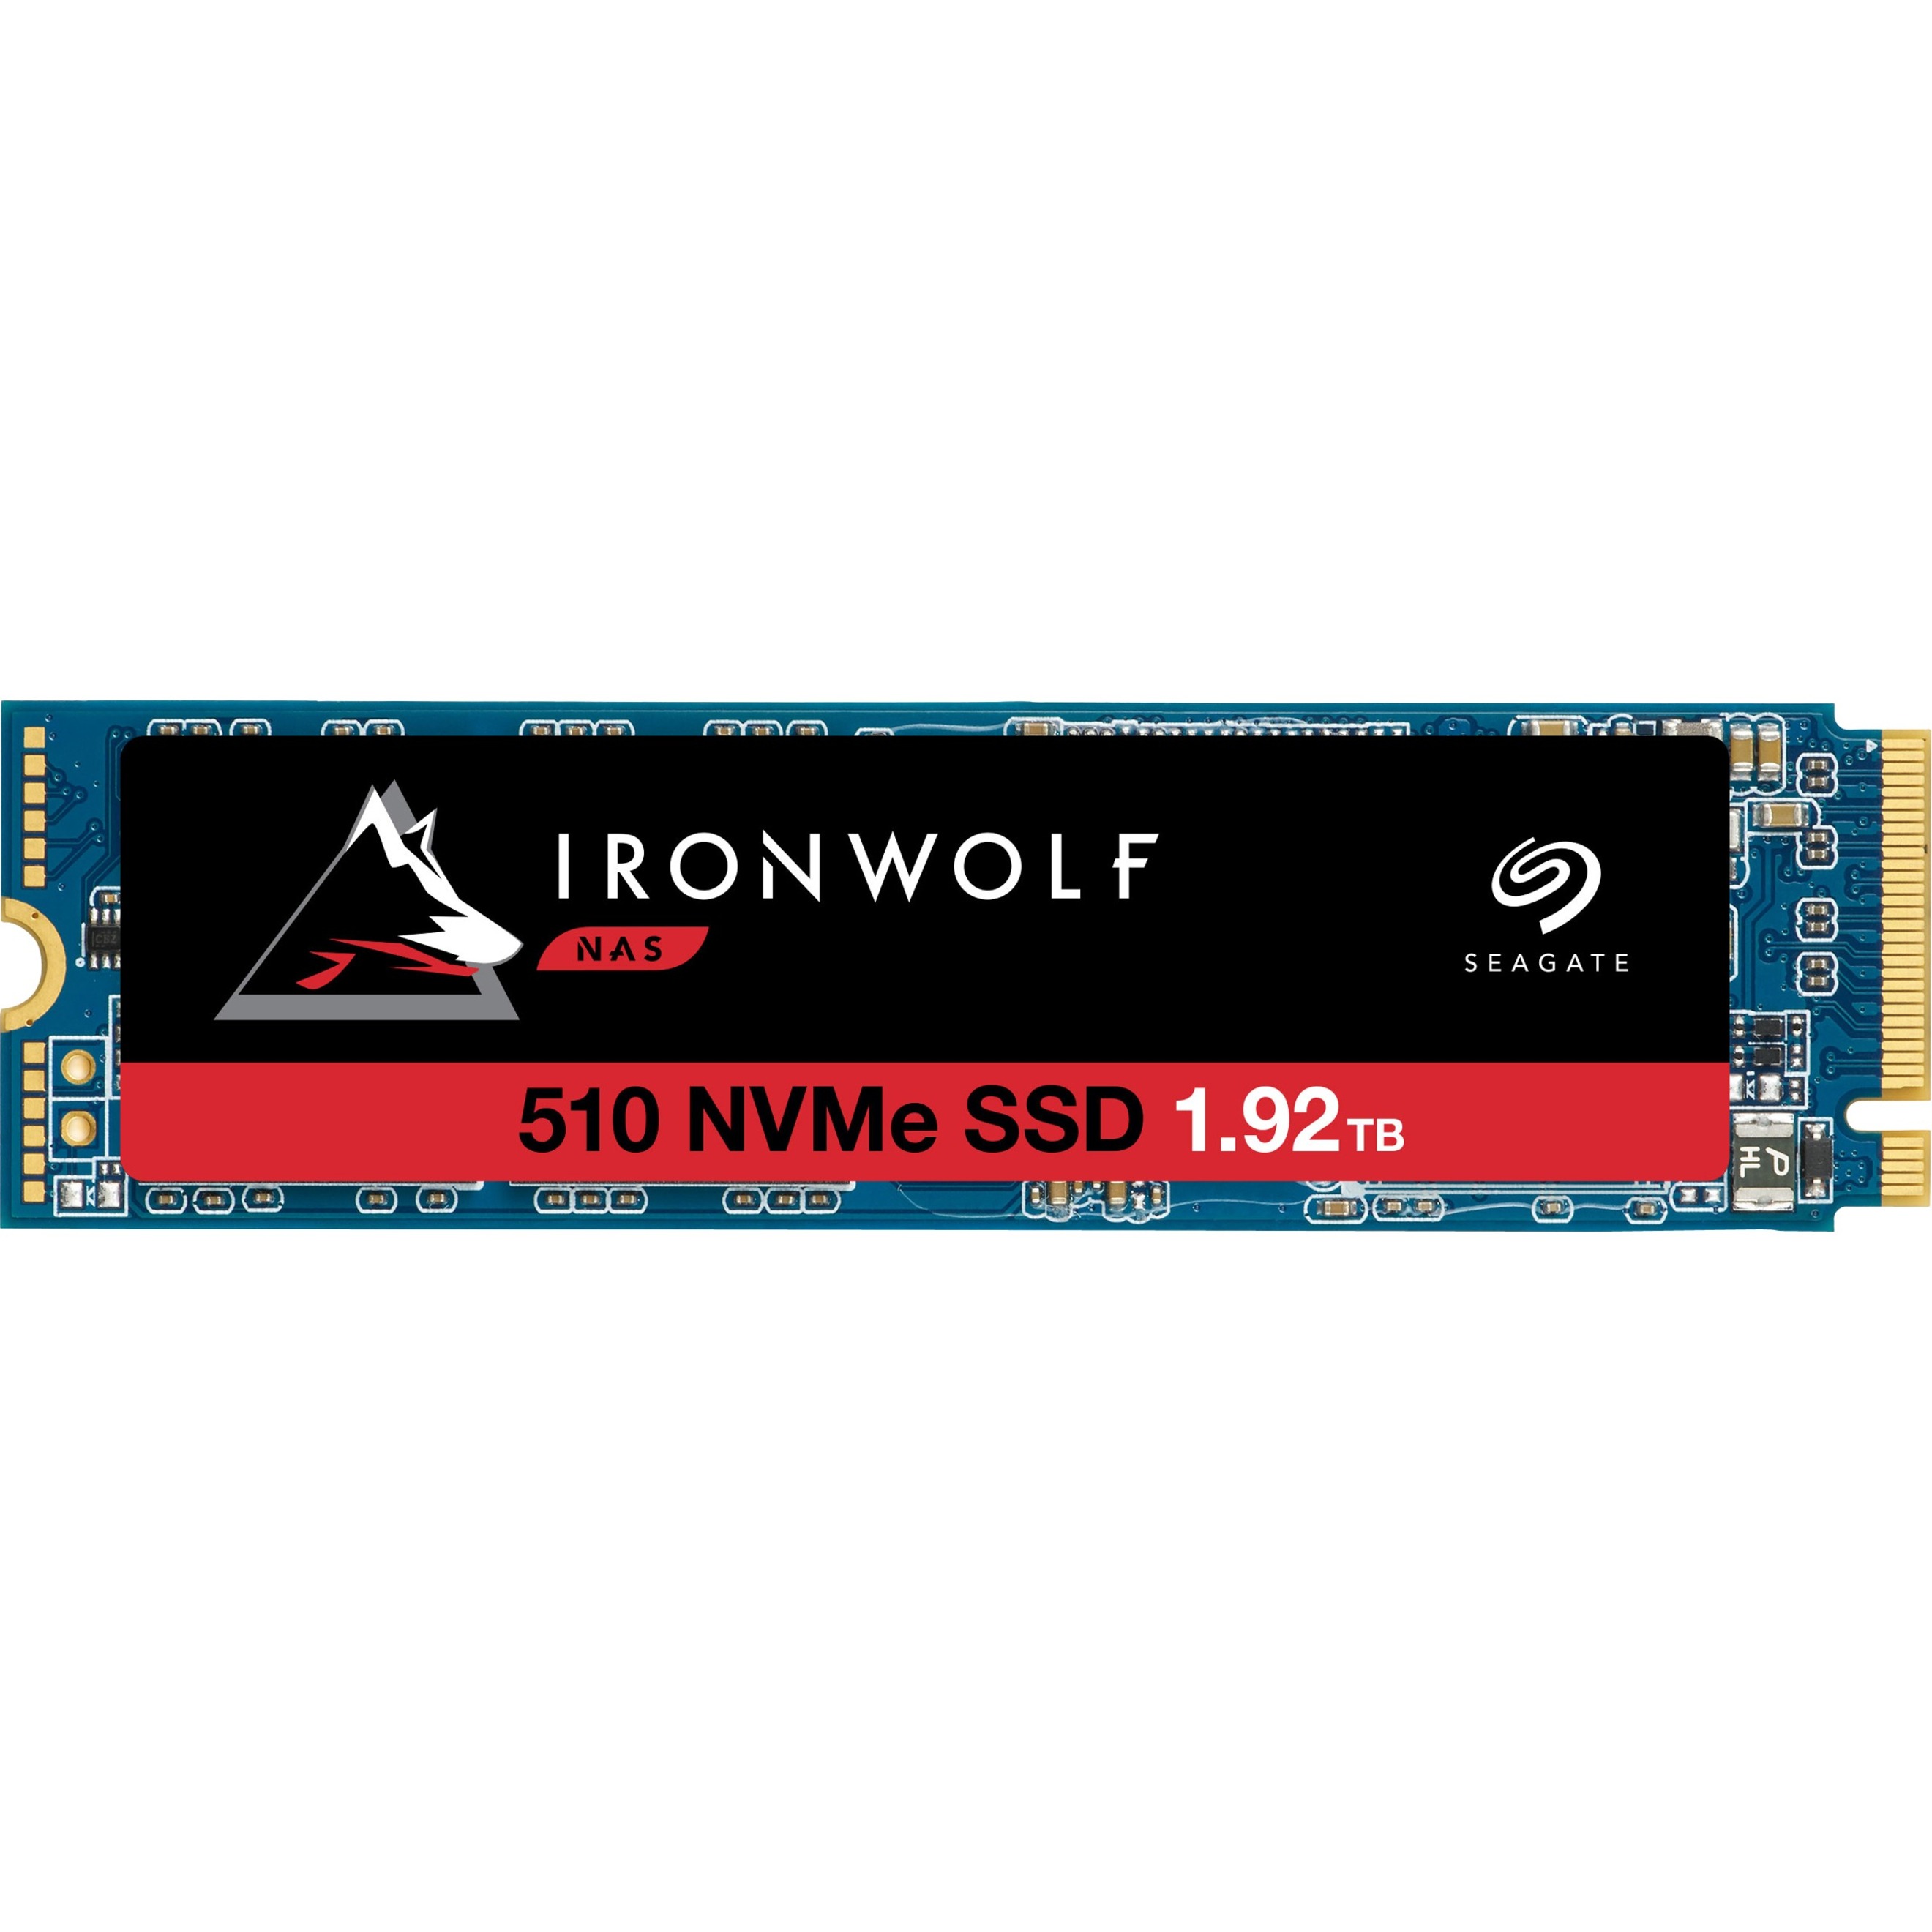 Seagate IronWolf 510 1.92TB NAS SSD Internal Solid State Drive – M.2 PCIe for Multibay RAID System Network Attached Storage (ZP1920NM30011) - image 1 of 4